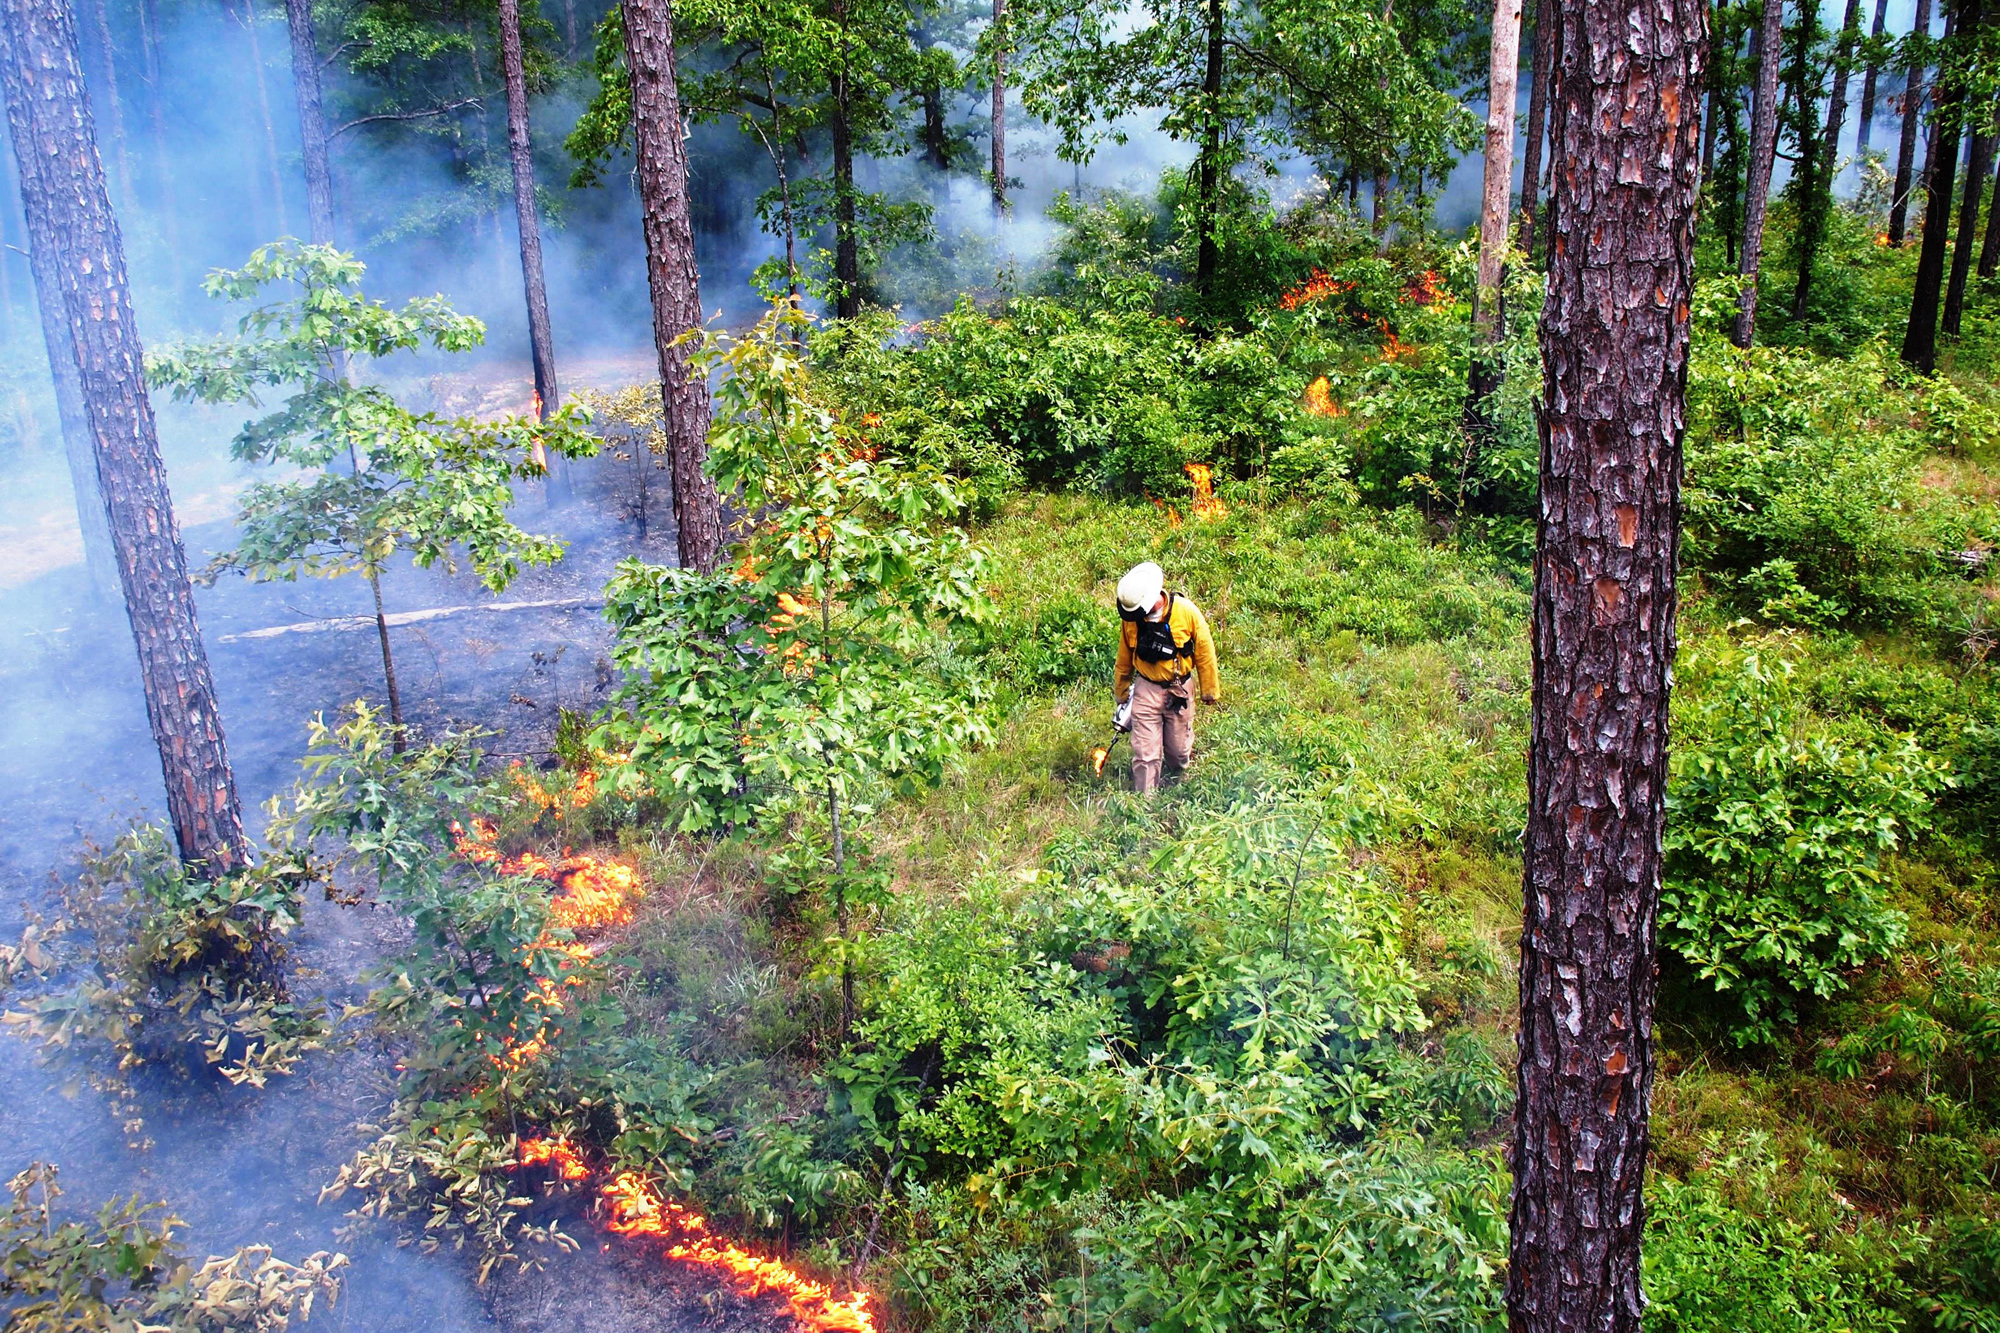 Fire technicians execute a burn to maintain longleaf forest on private land. Credit: Randy Tate/The Longleaf Alliance